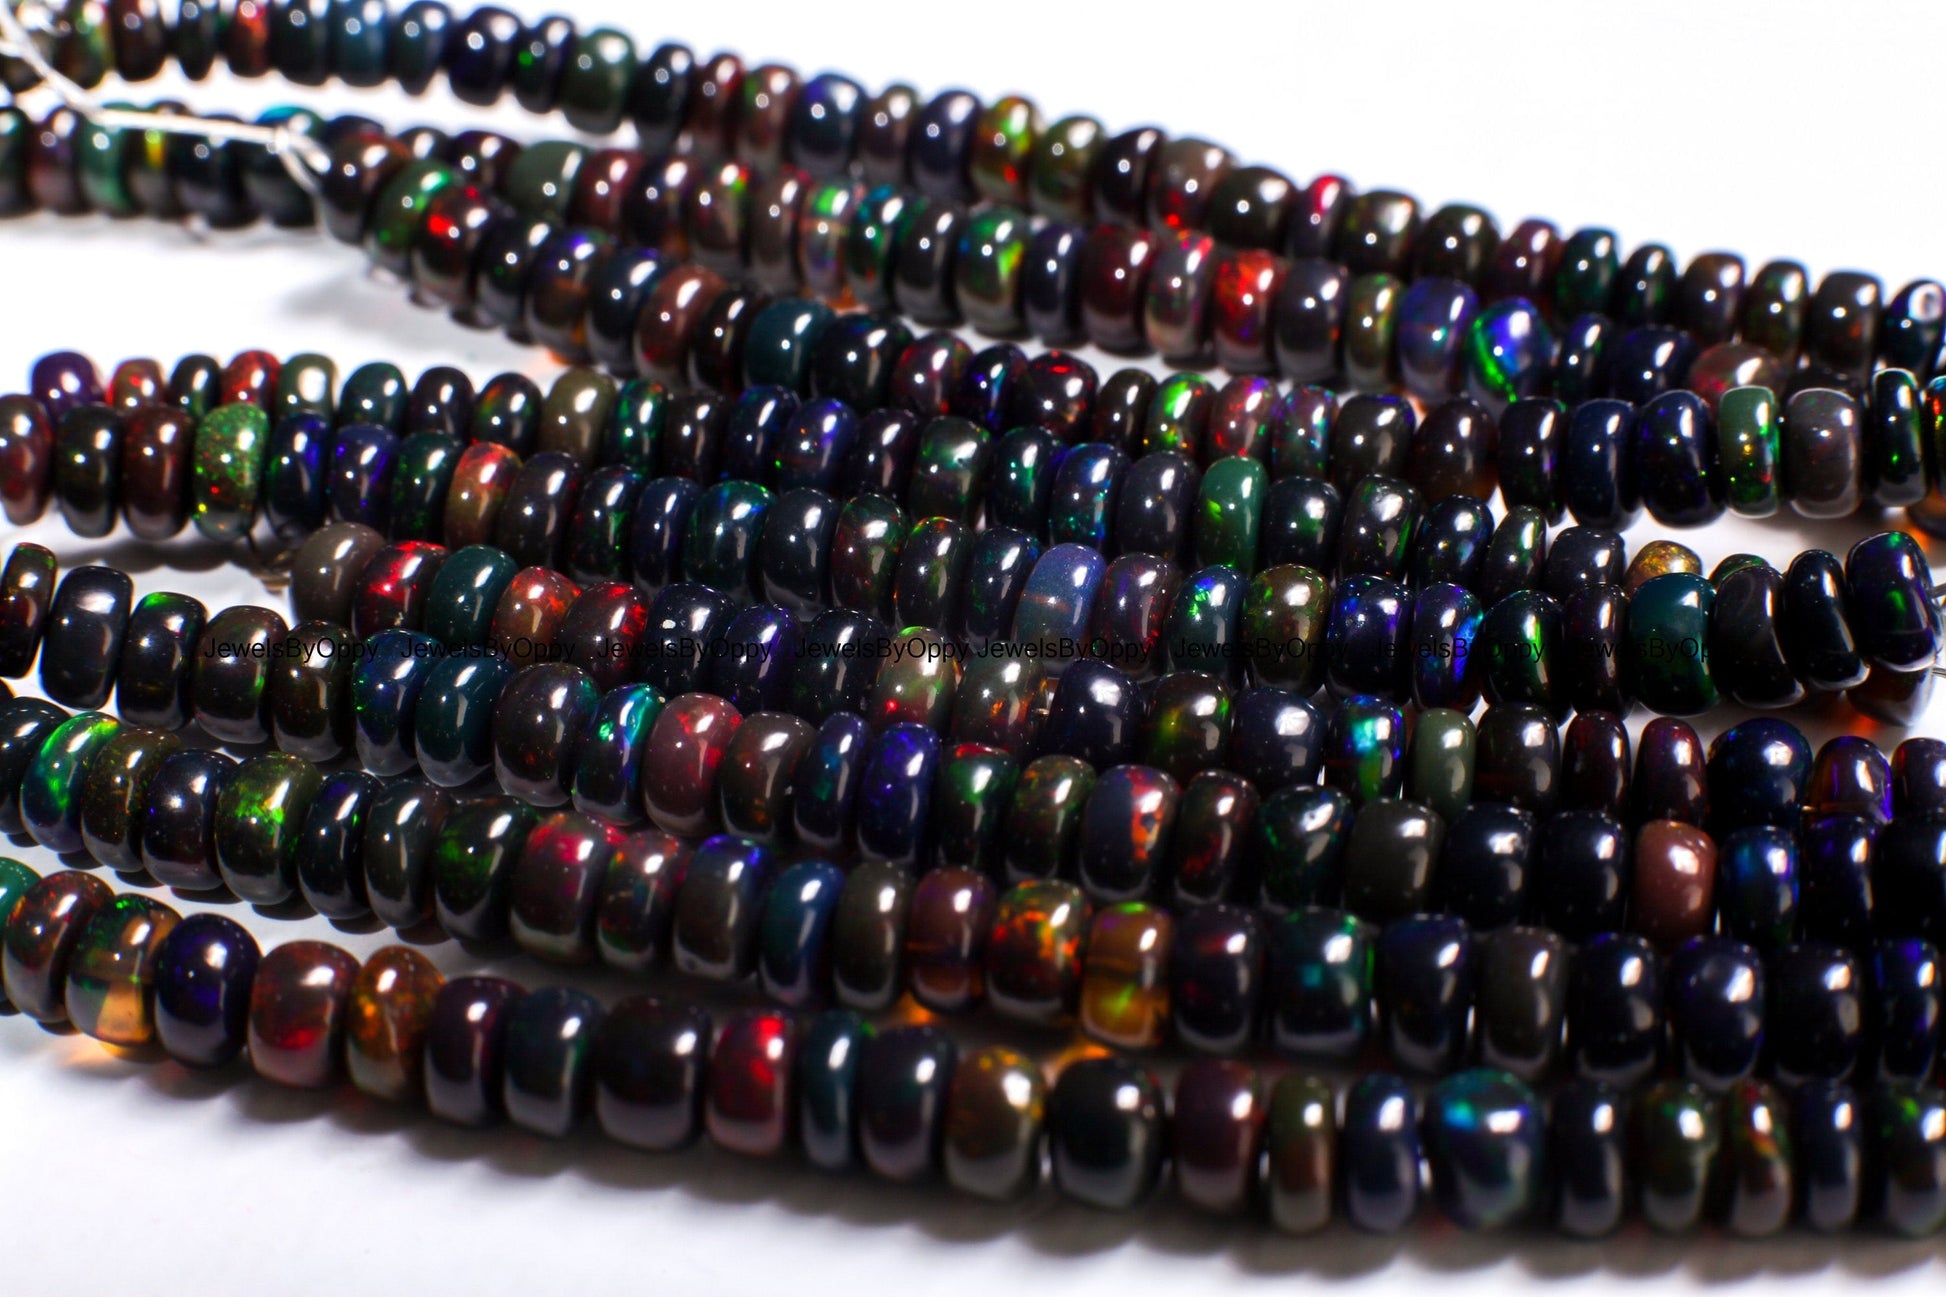 Black Ethiopian Opal Smooth Rondelle 4.5-5mm, Jewelry Making Bracelet, Necklace, Natural, High Quality Gemstone Beads 3&quot;, 7&quot;, 15&quot; strand